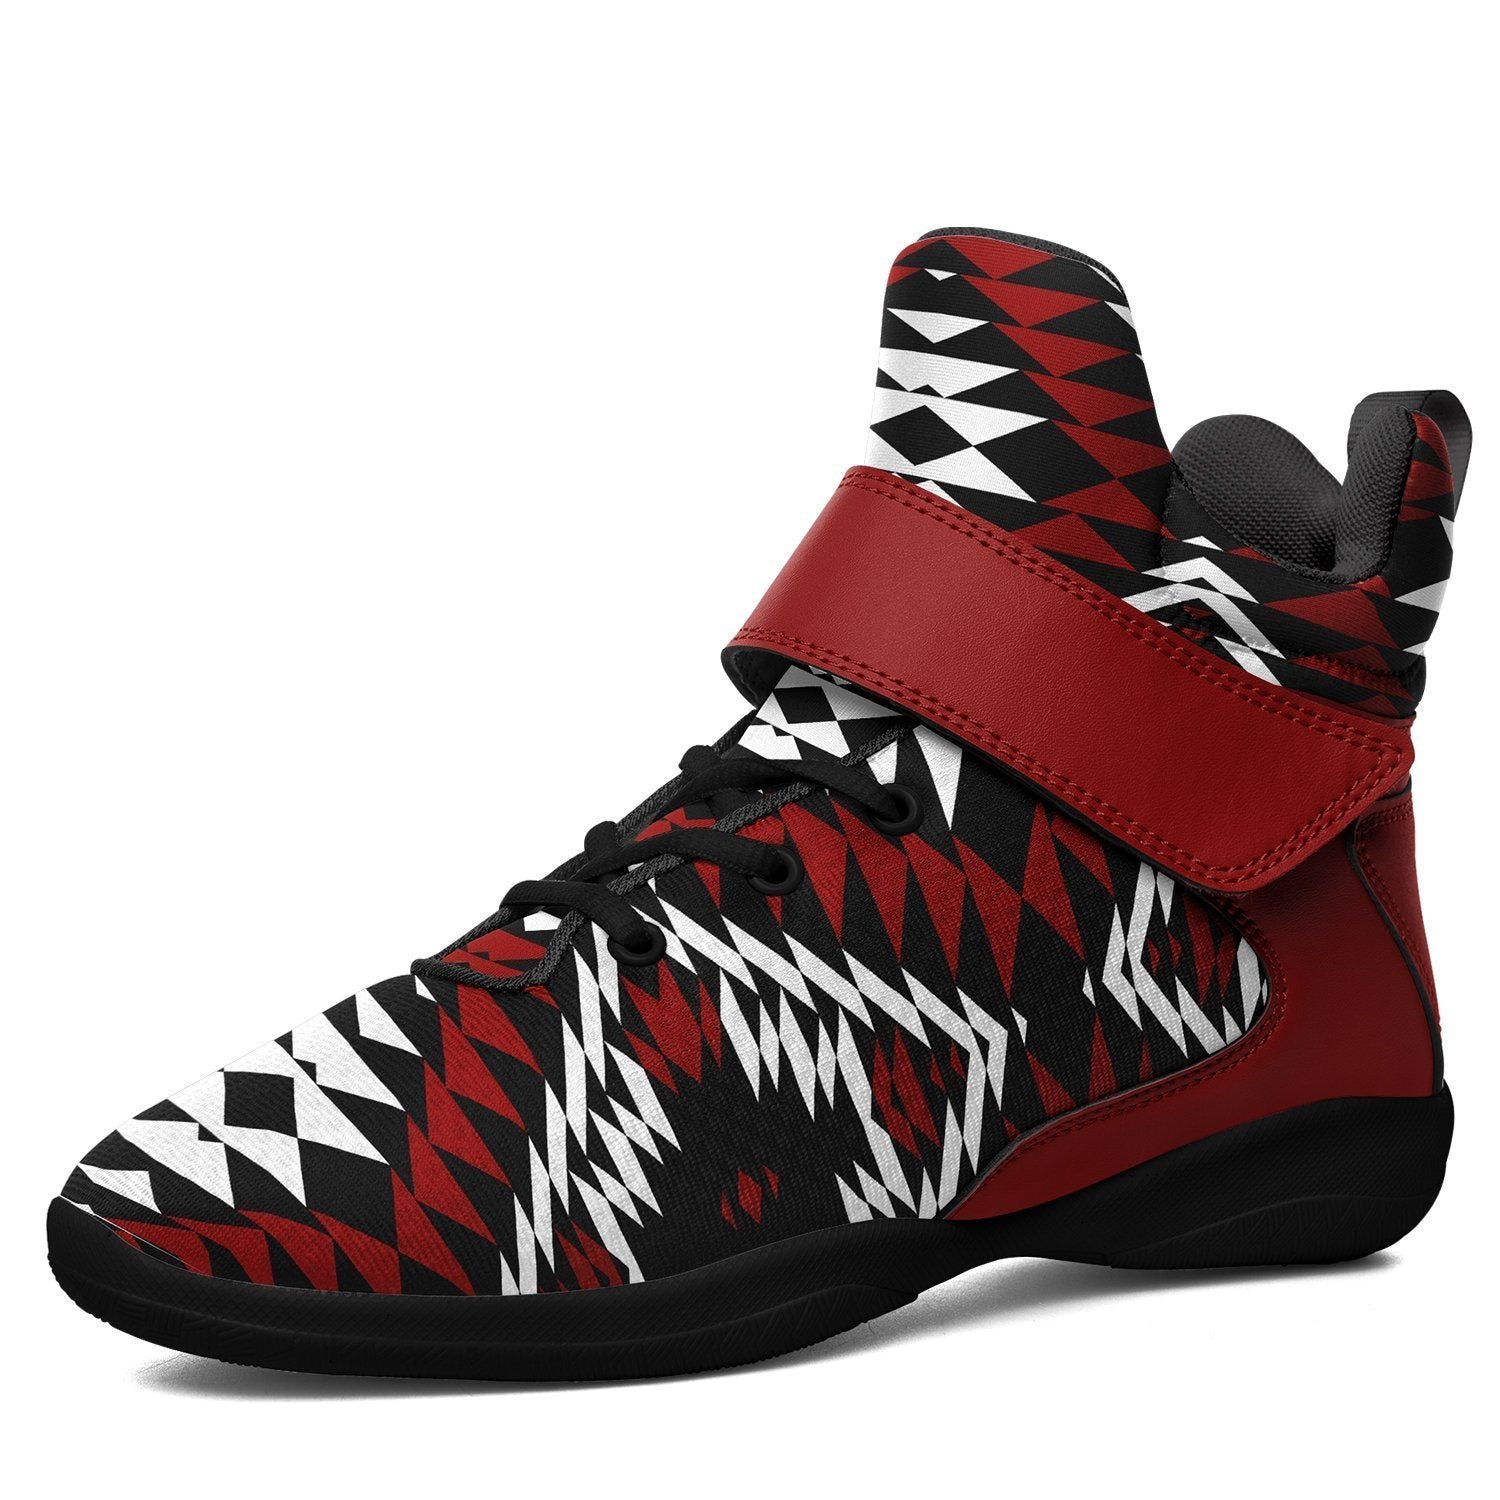 Taos Wool Kid's Ipottaa Basketball / Sport High Top Shoes 49 Dzine US Child 12.5 / EUR 30 Black Sole with Dark Red Strap 